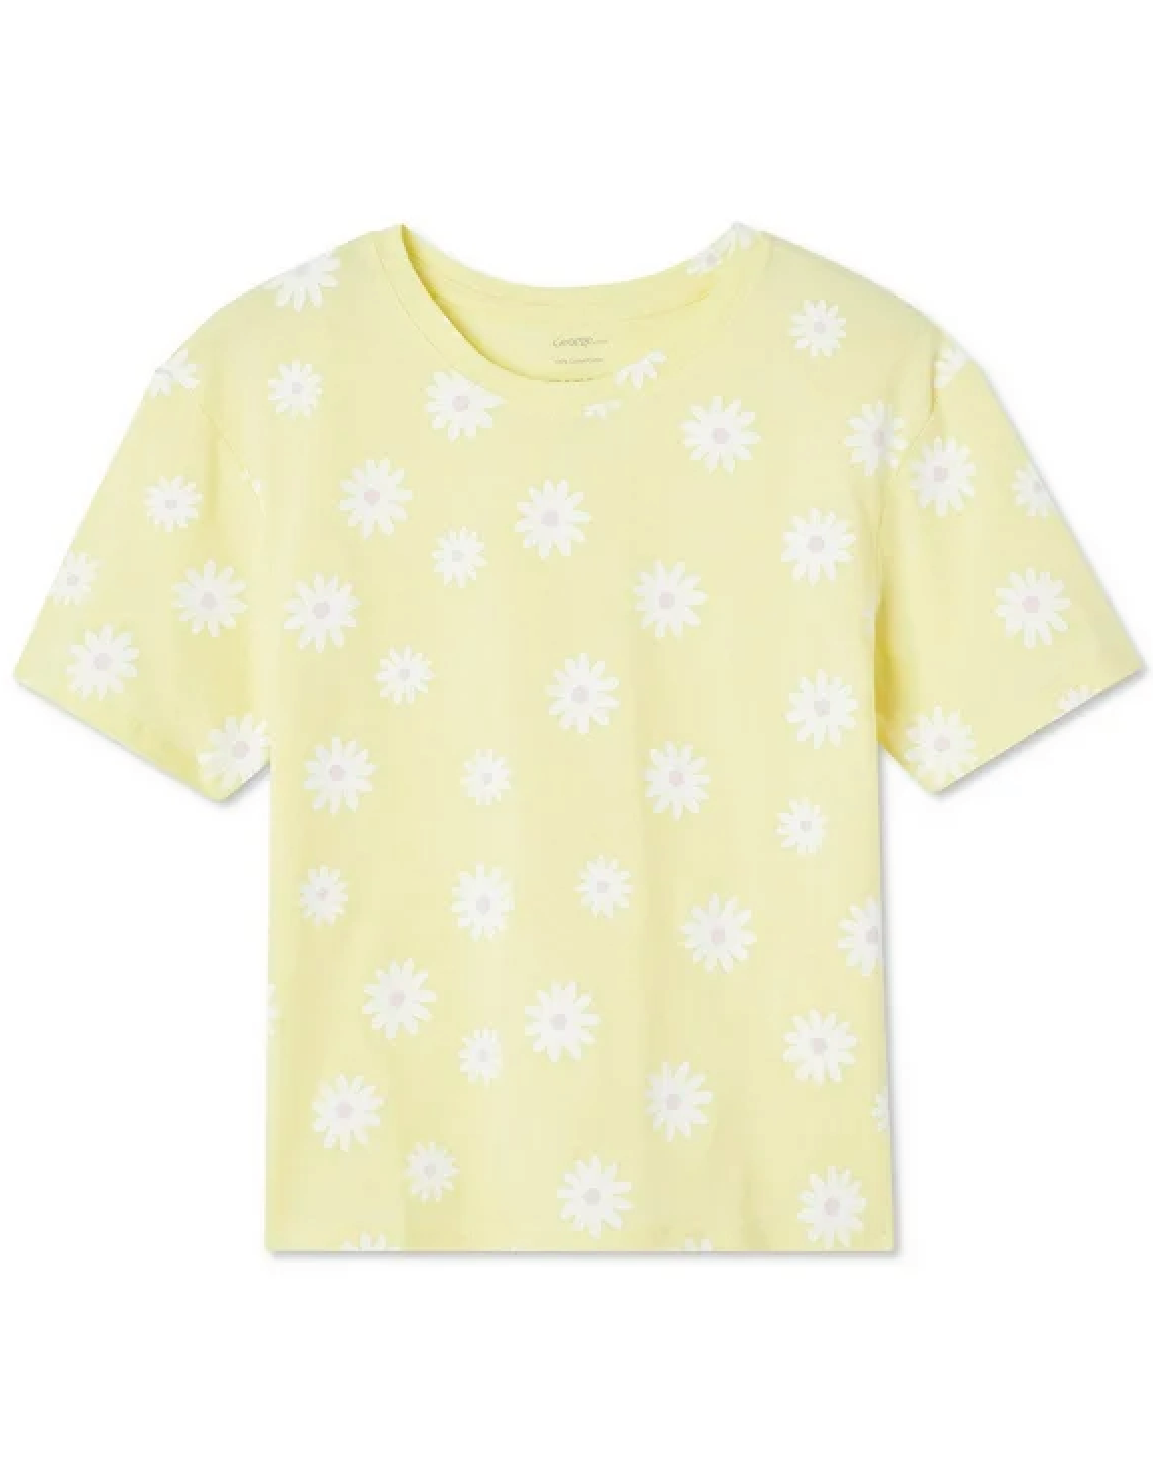 shirt with daisies printed all over 